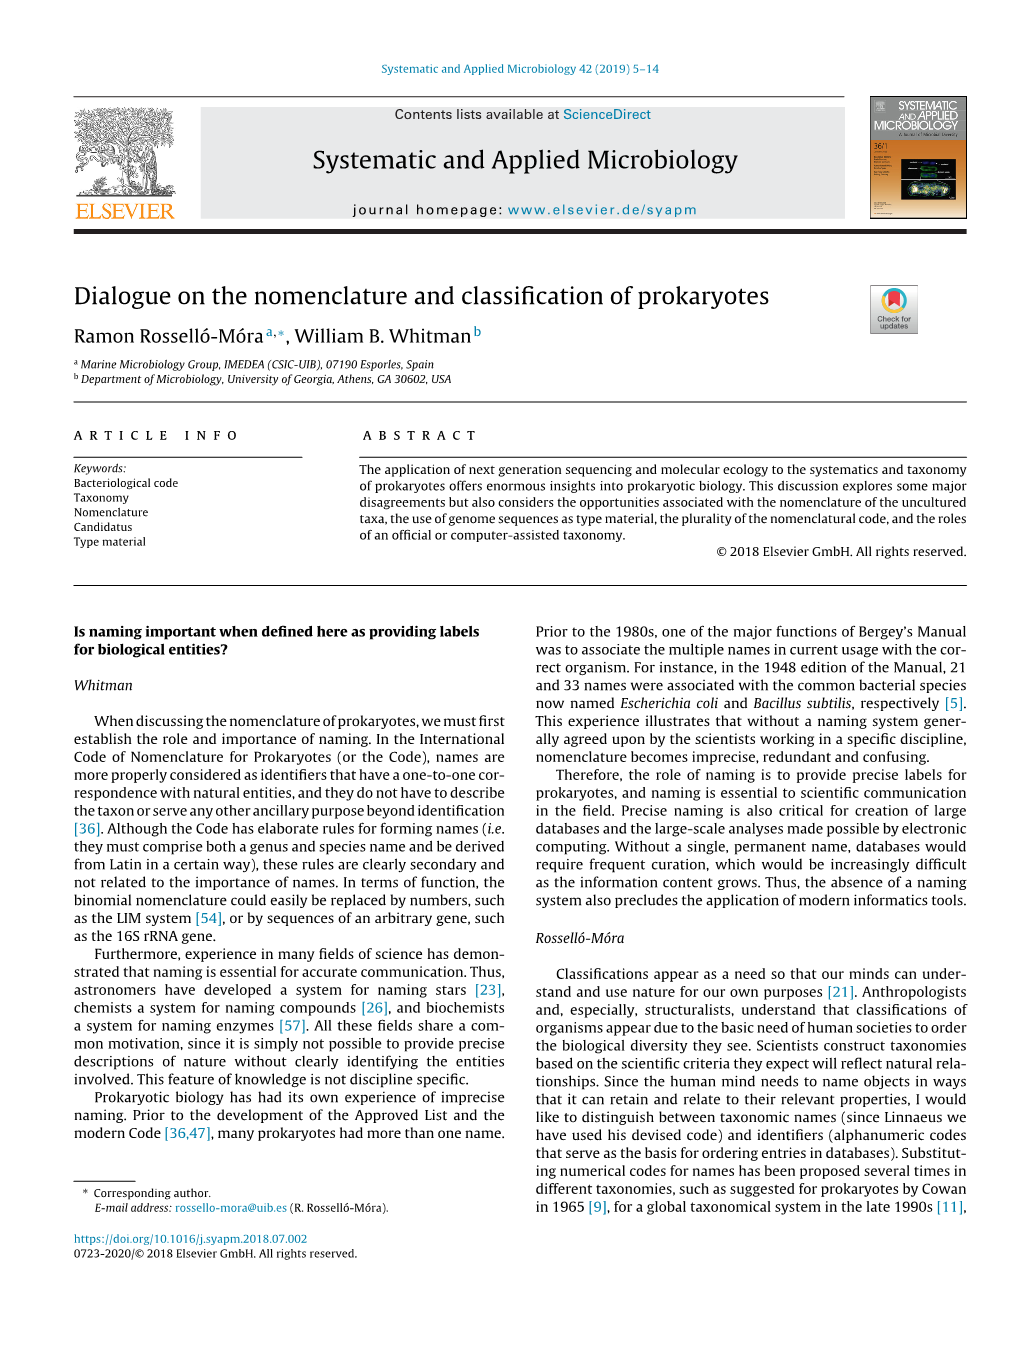 Dialogue on the Nomenclature and Classification of Prokaryotes